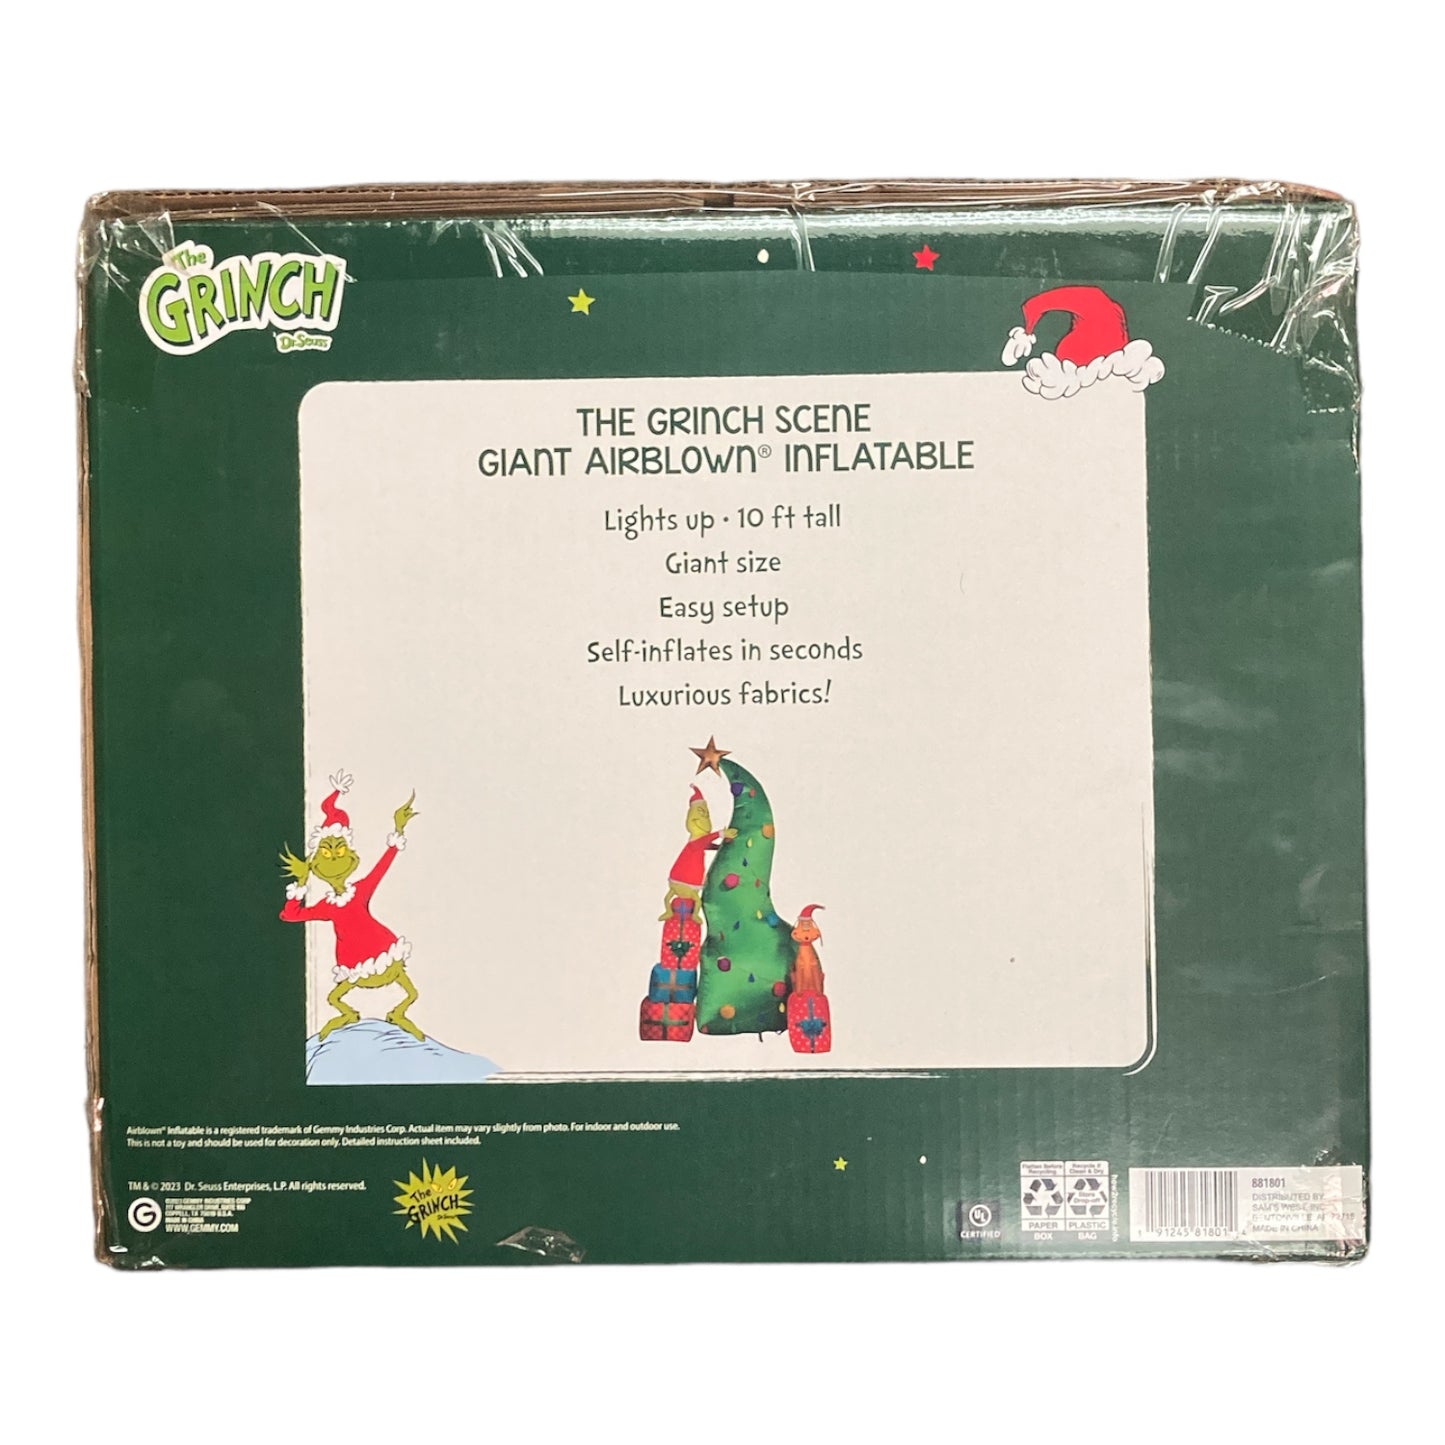 10 Ft. Tall Christmas Inflatable Grinch and Max with Christmas Tree and Presents